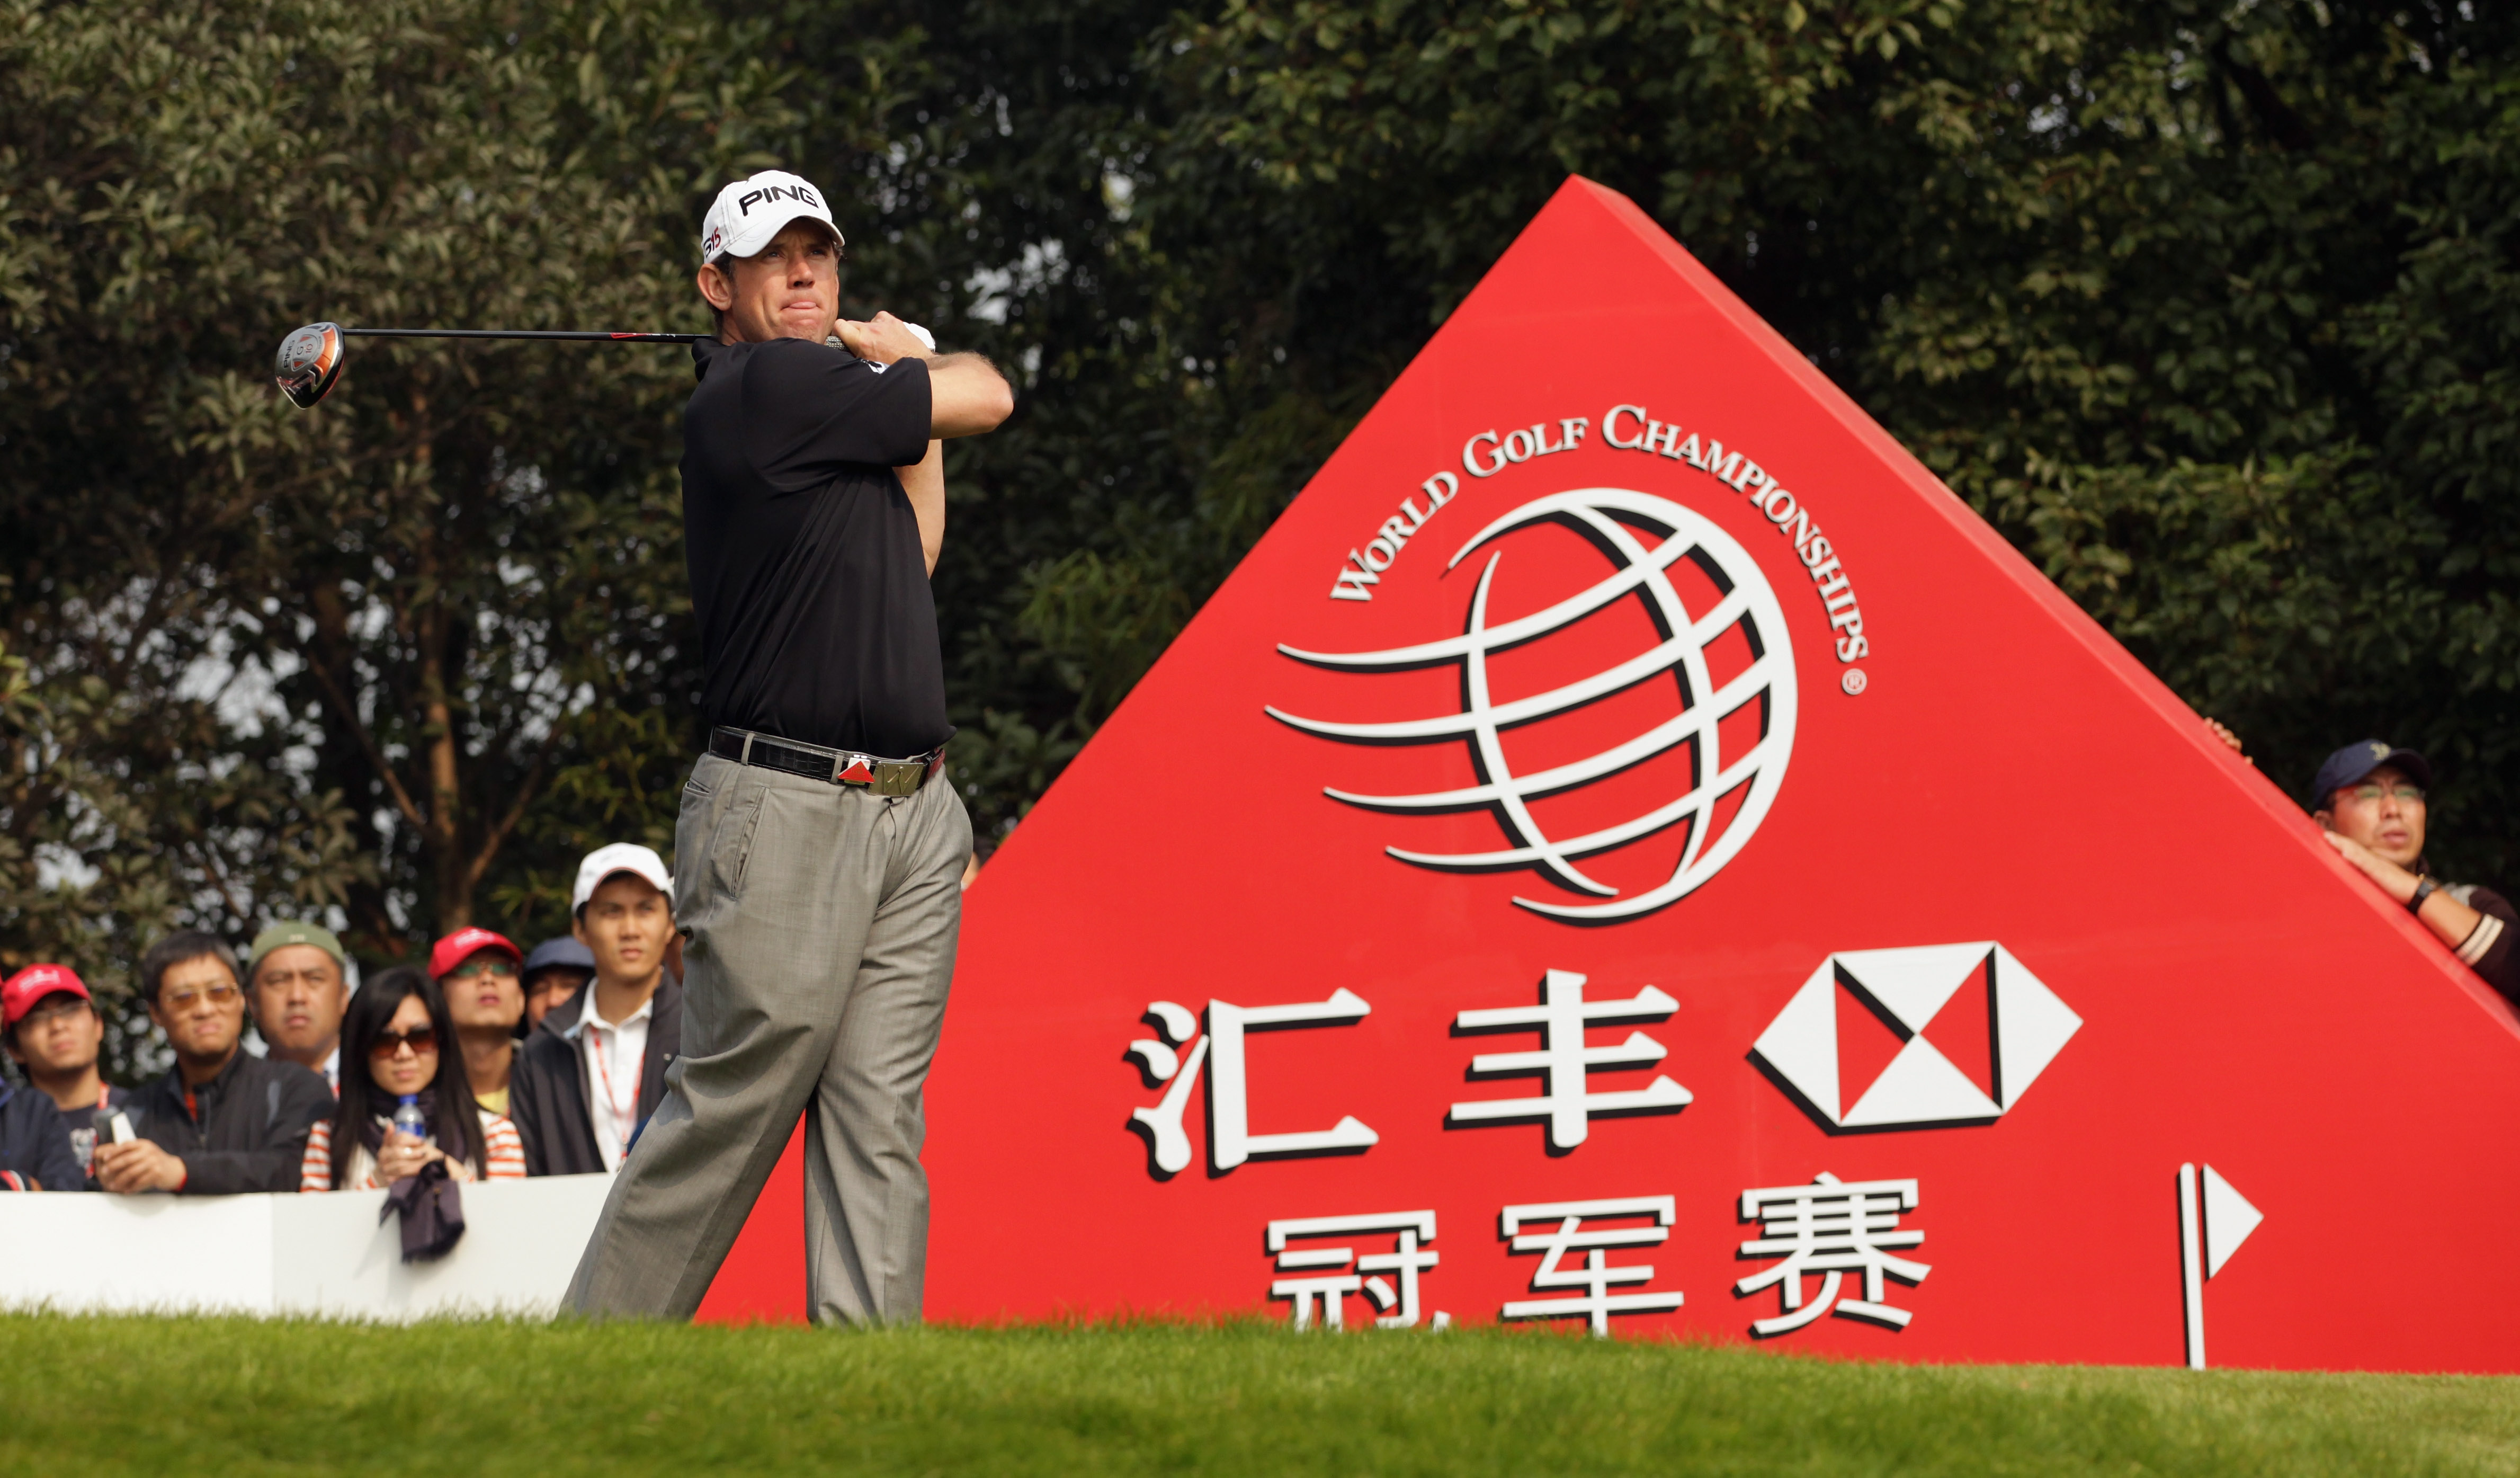 SHANGHAI, CHINA - NOVEMBER 07:  Lee Westwood of England hits his tee-shot on the second hole during the final round of the WGC- HSBC Champions at Sheshan International Golf Club on November 7, 2010 in Shanghai, China.  (Photo by Andrew Redington/Getty Ima